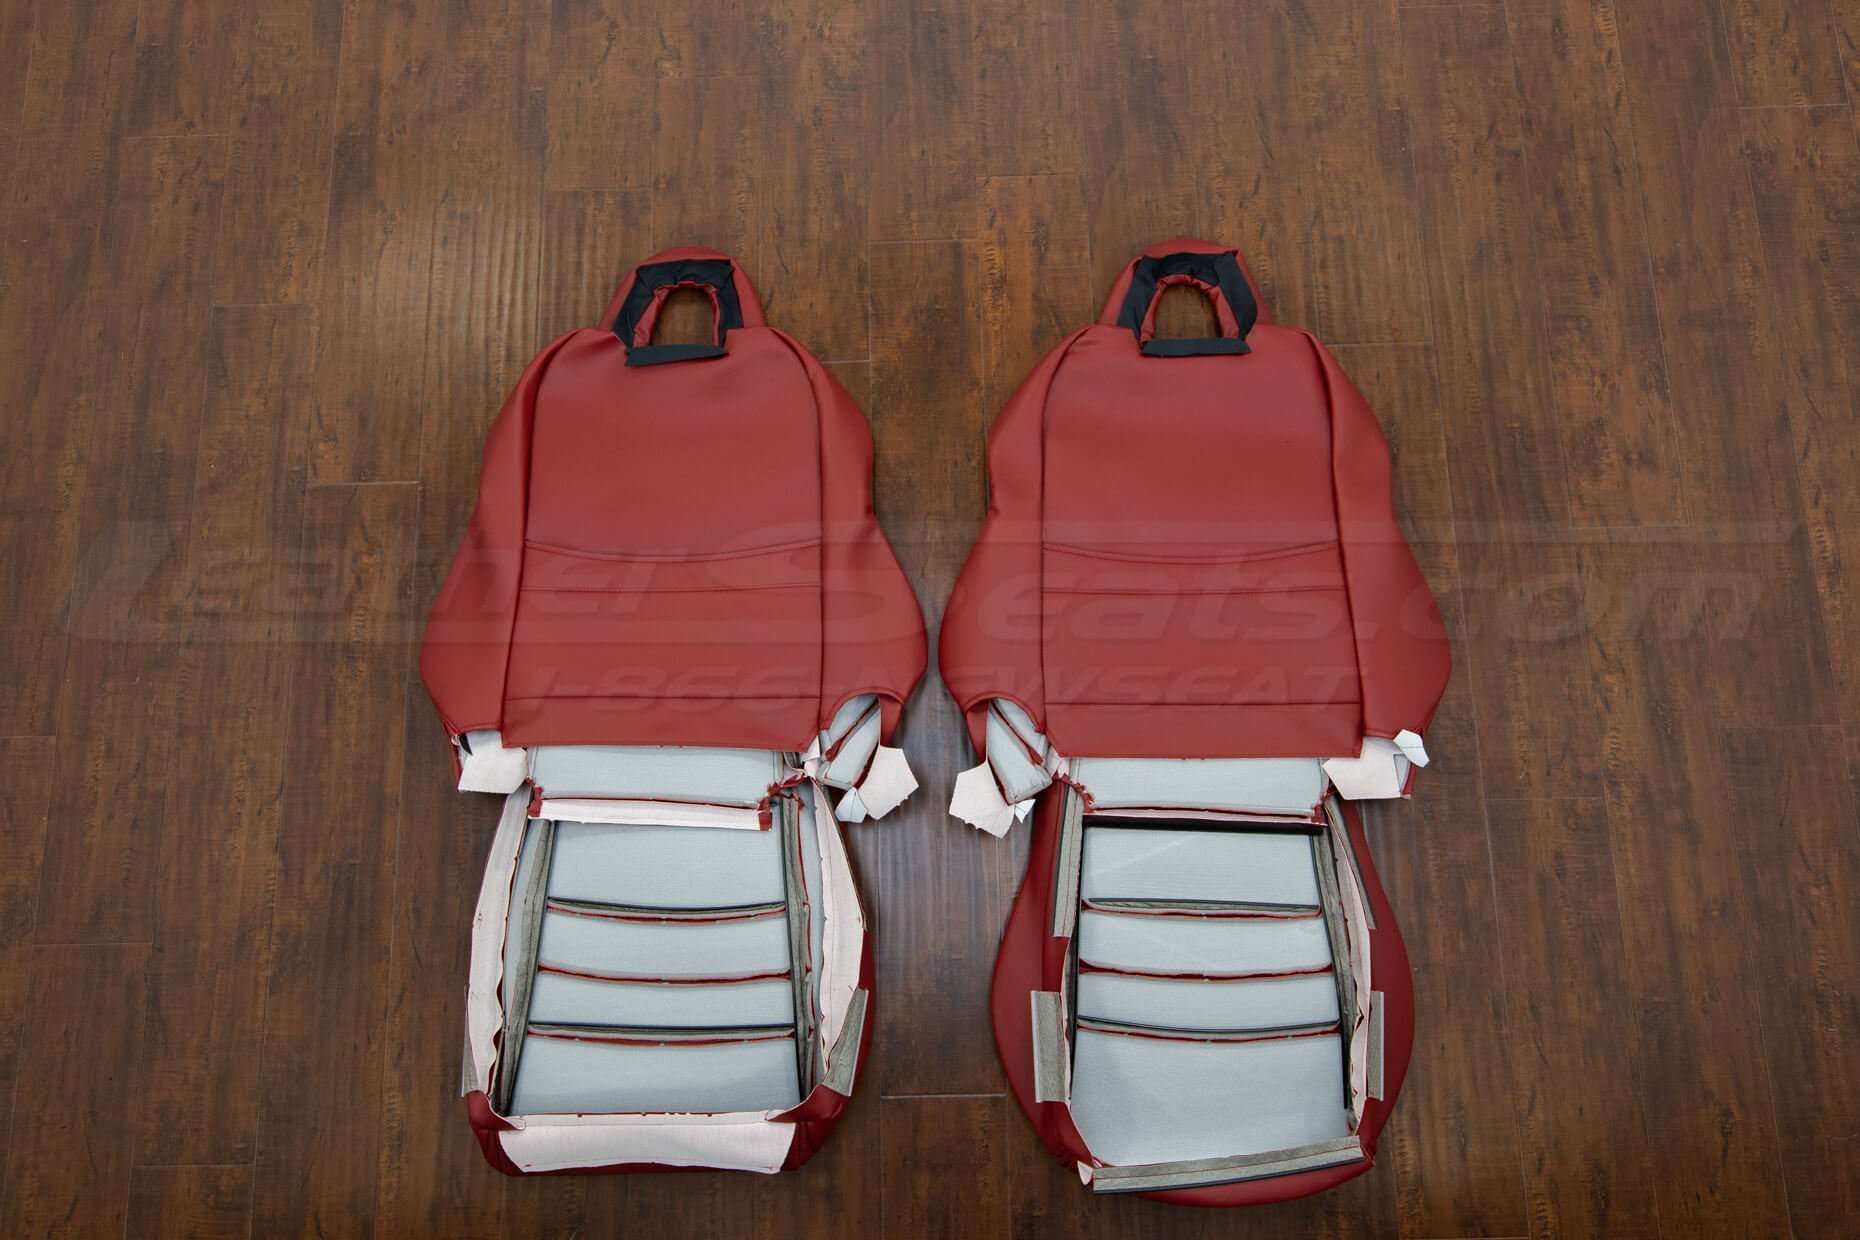 Honda S2000 Upholstery kit in Cardinal - Back view of front seats